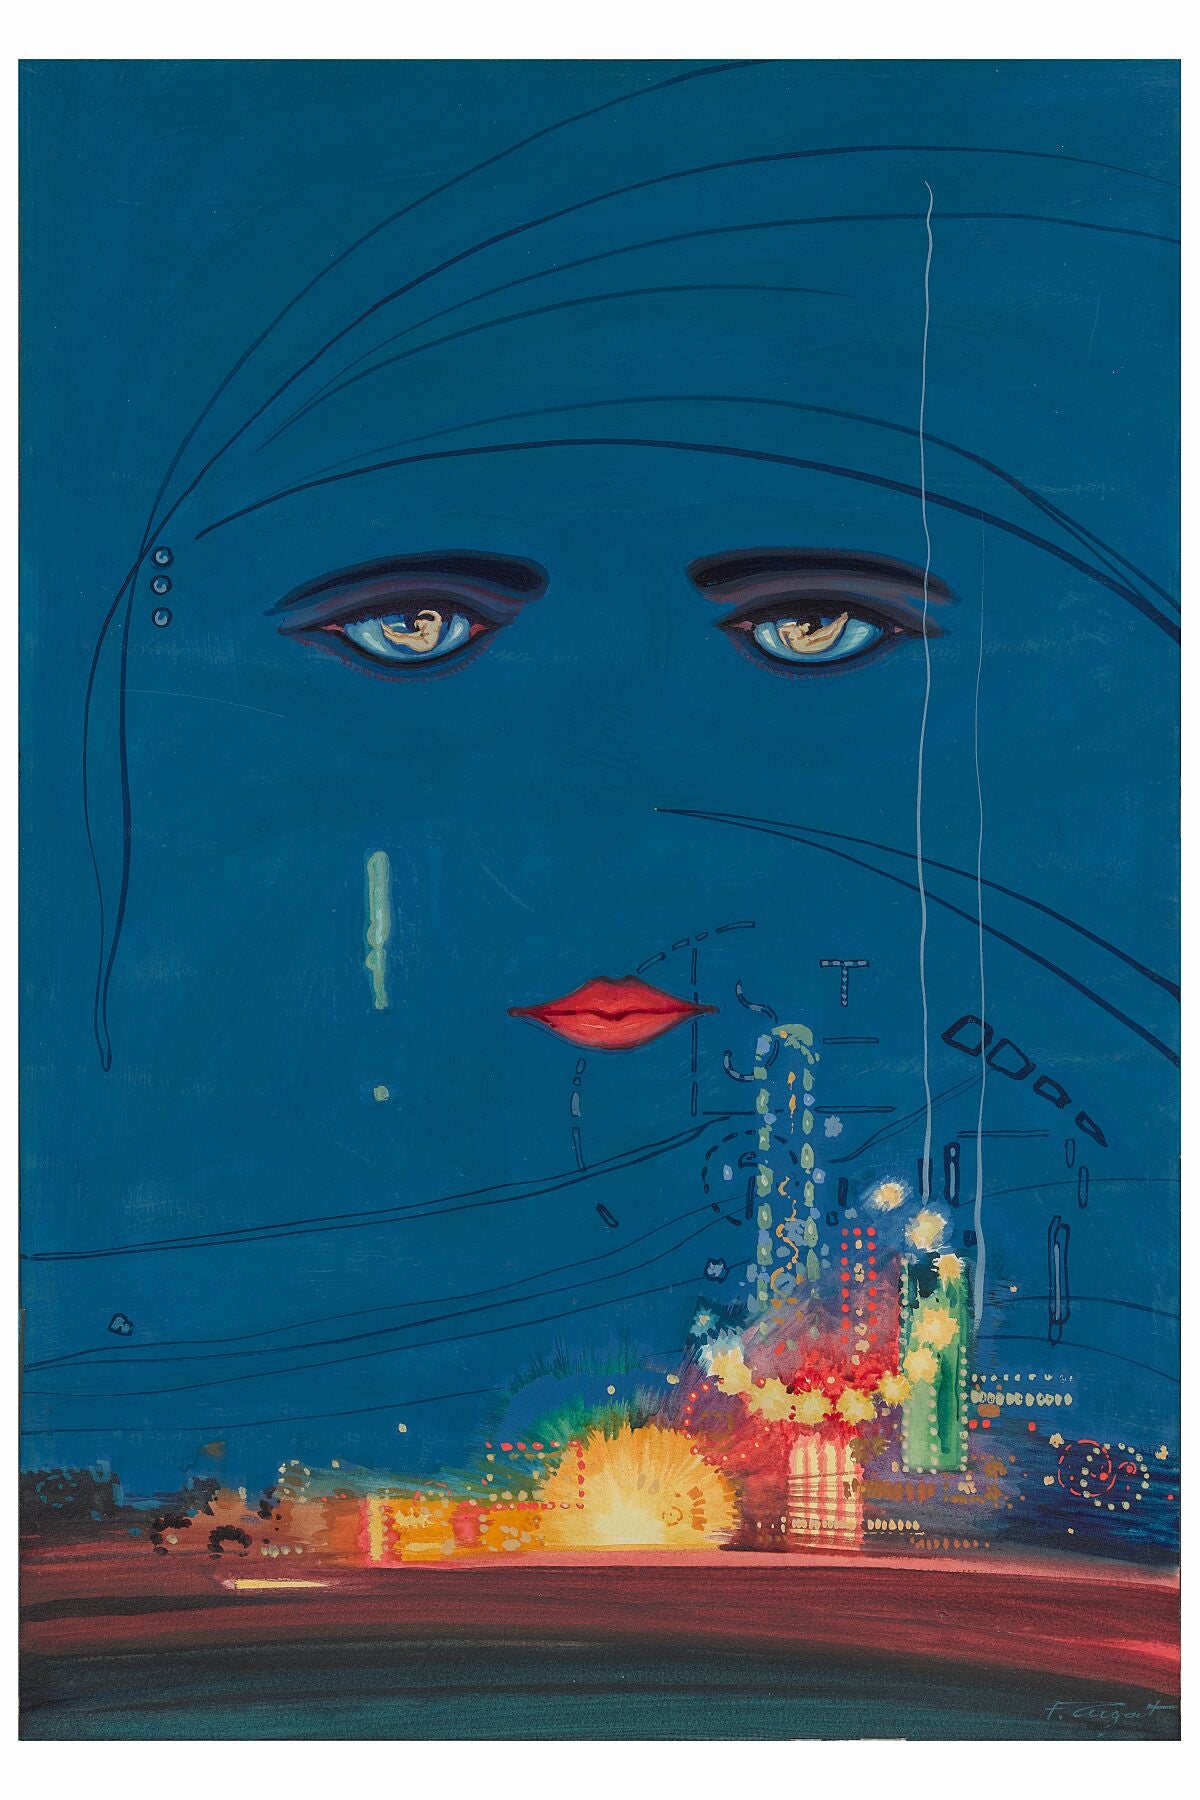 Celestial Eyes, Cover for The Great Gatsby by Francis Cugat, 1925